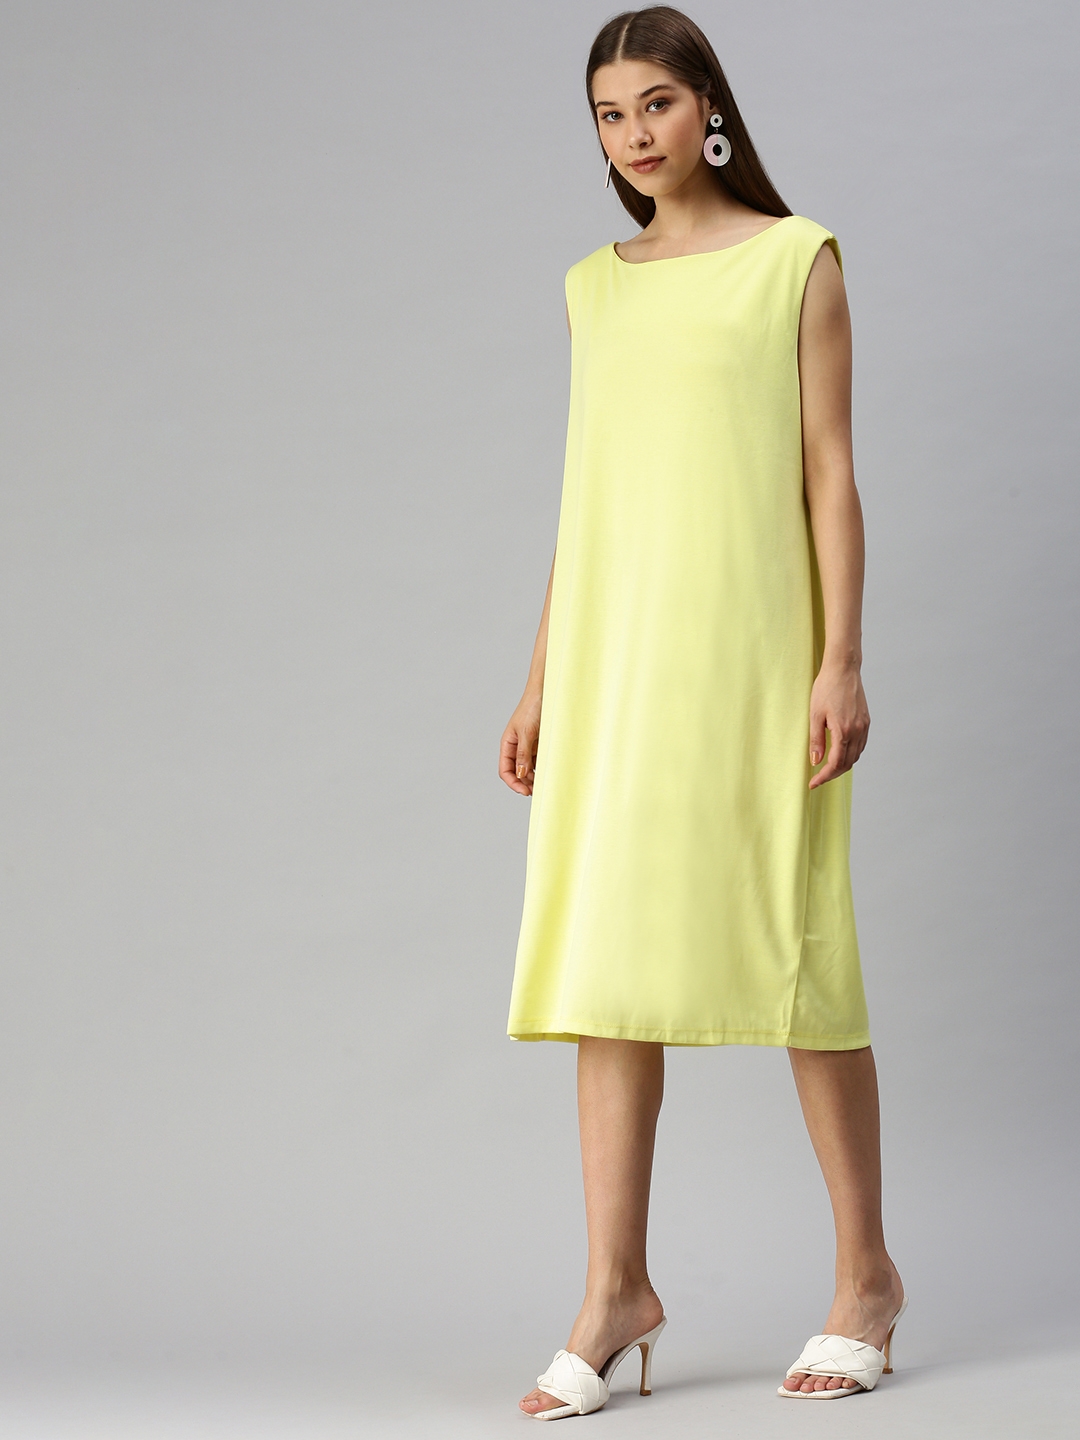 Showoff | SHOWOFF Women Yellow Solid Round Neck Sleeveless Knee length T-shirt Dress 2